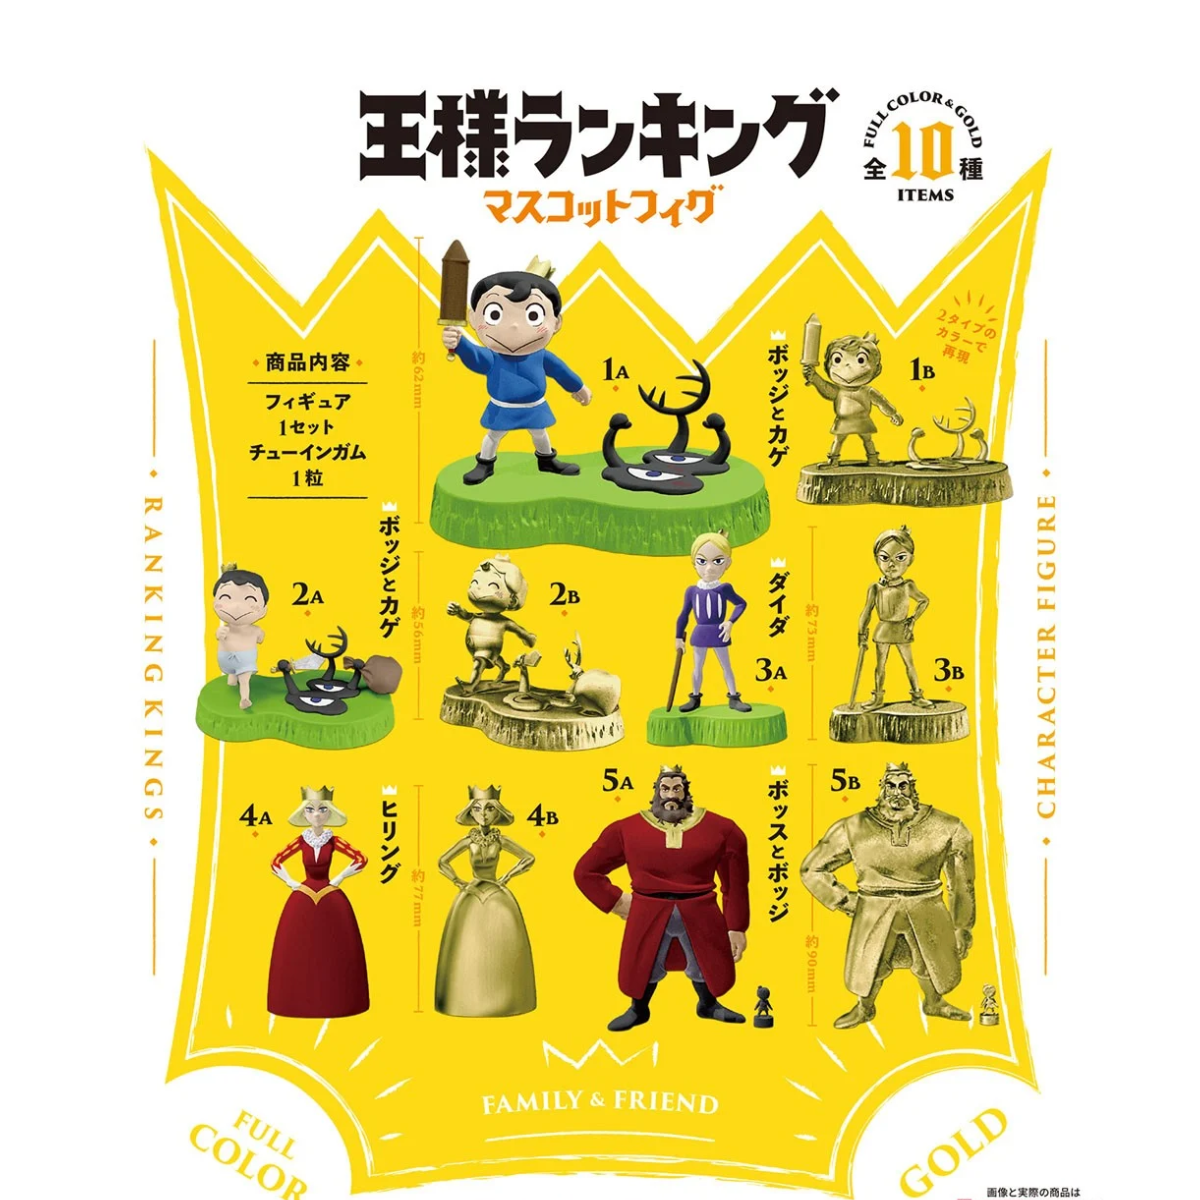 Ranking Of Kings Character Figure-Single Box (Random)-F-toys confect-Ace Cards &amp; Collectibles